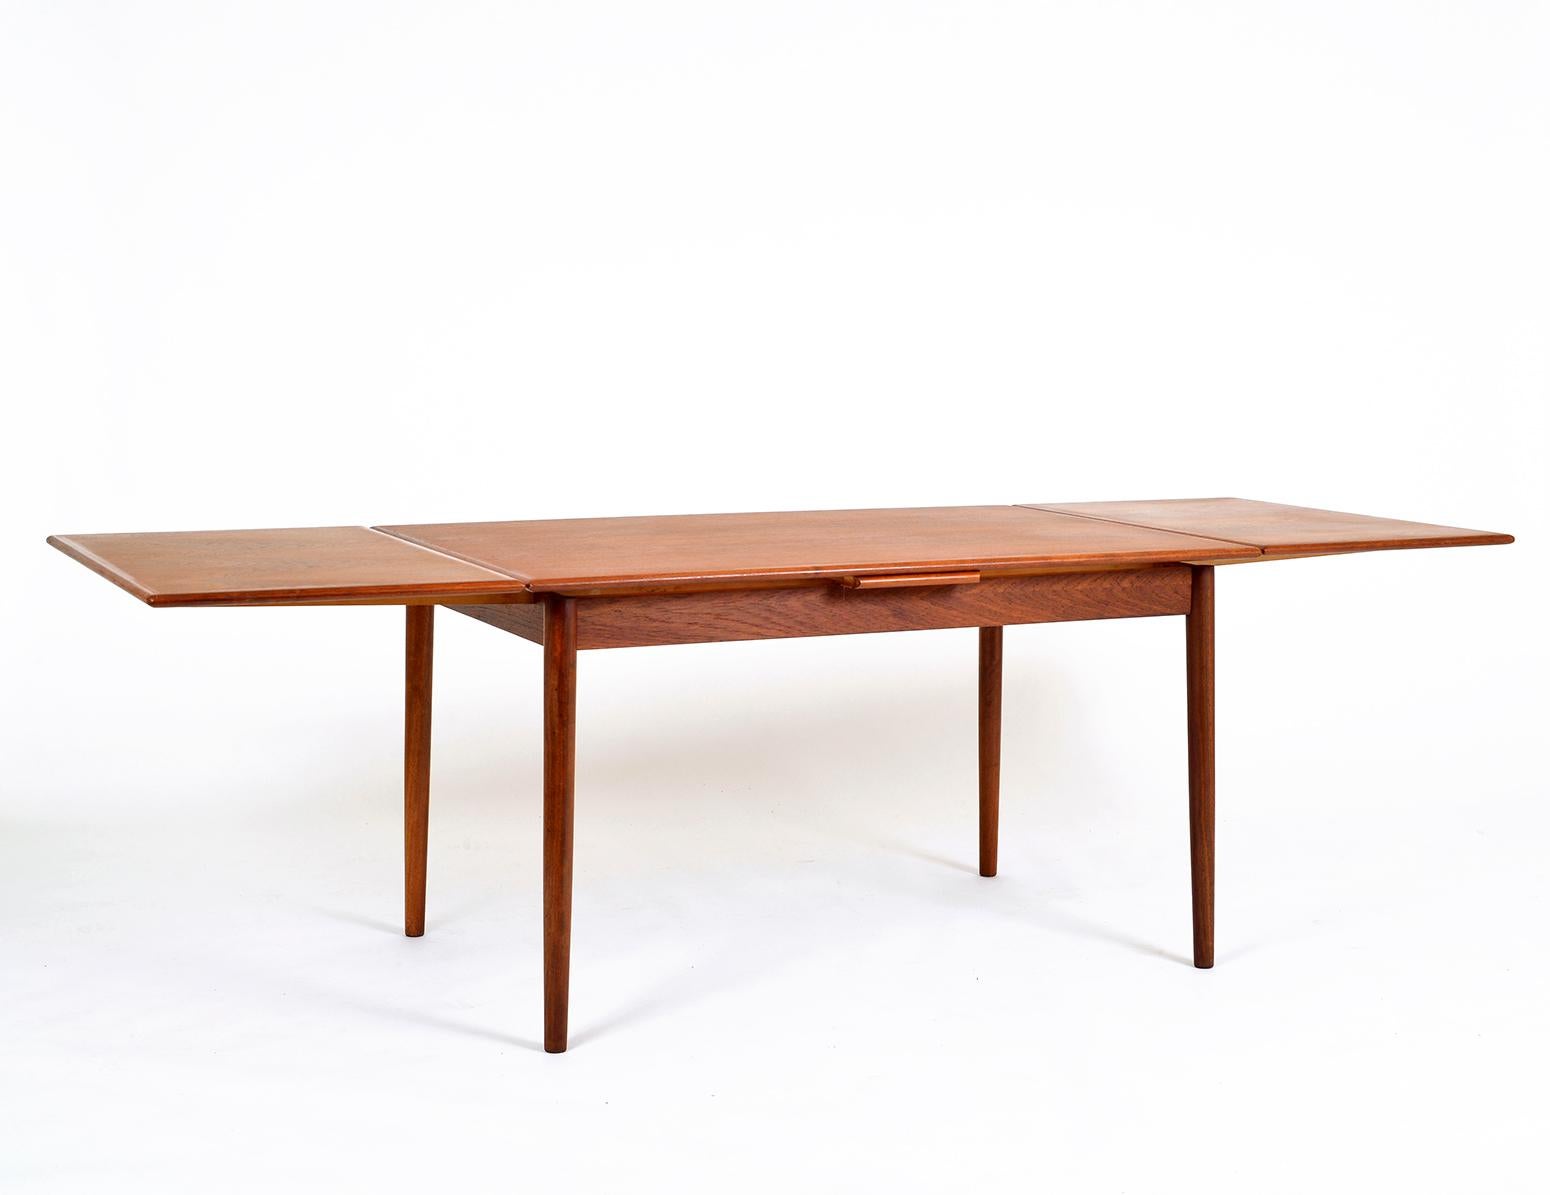 Slim, sleek and very stylish, this 1960s Danish modern draw leaf teak extending dining table was manufactured by AM Møbler (Ansager Møbler) Denmark. It seats six when closed (130 cm) and up to ten when extended (238 cm).
There are no marks or